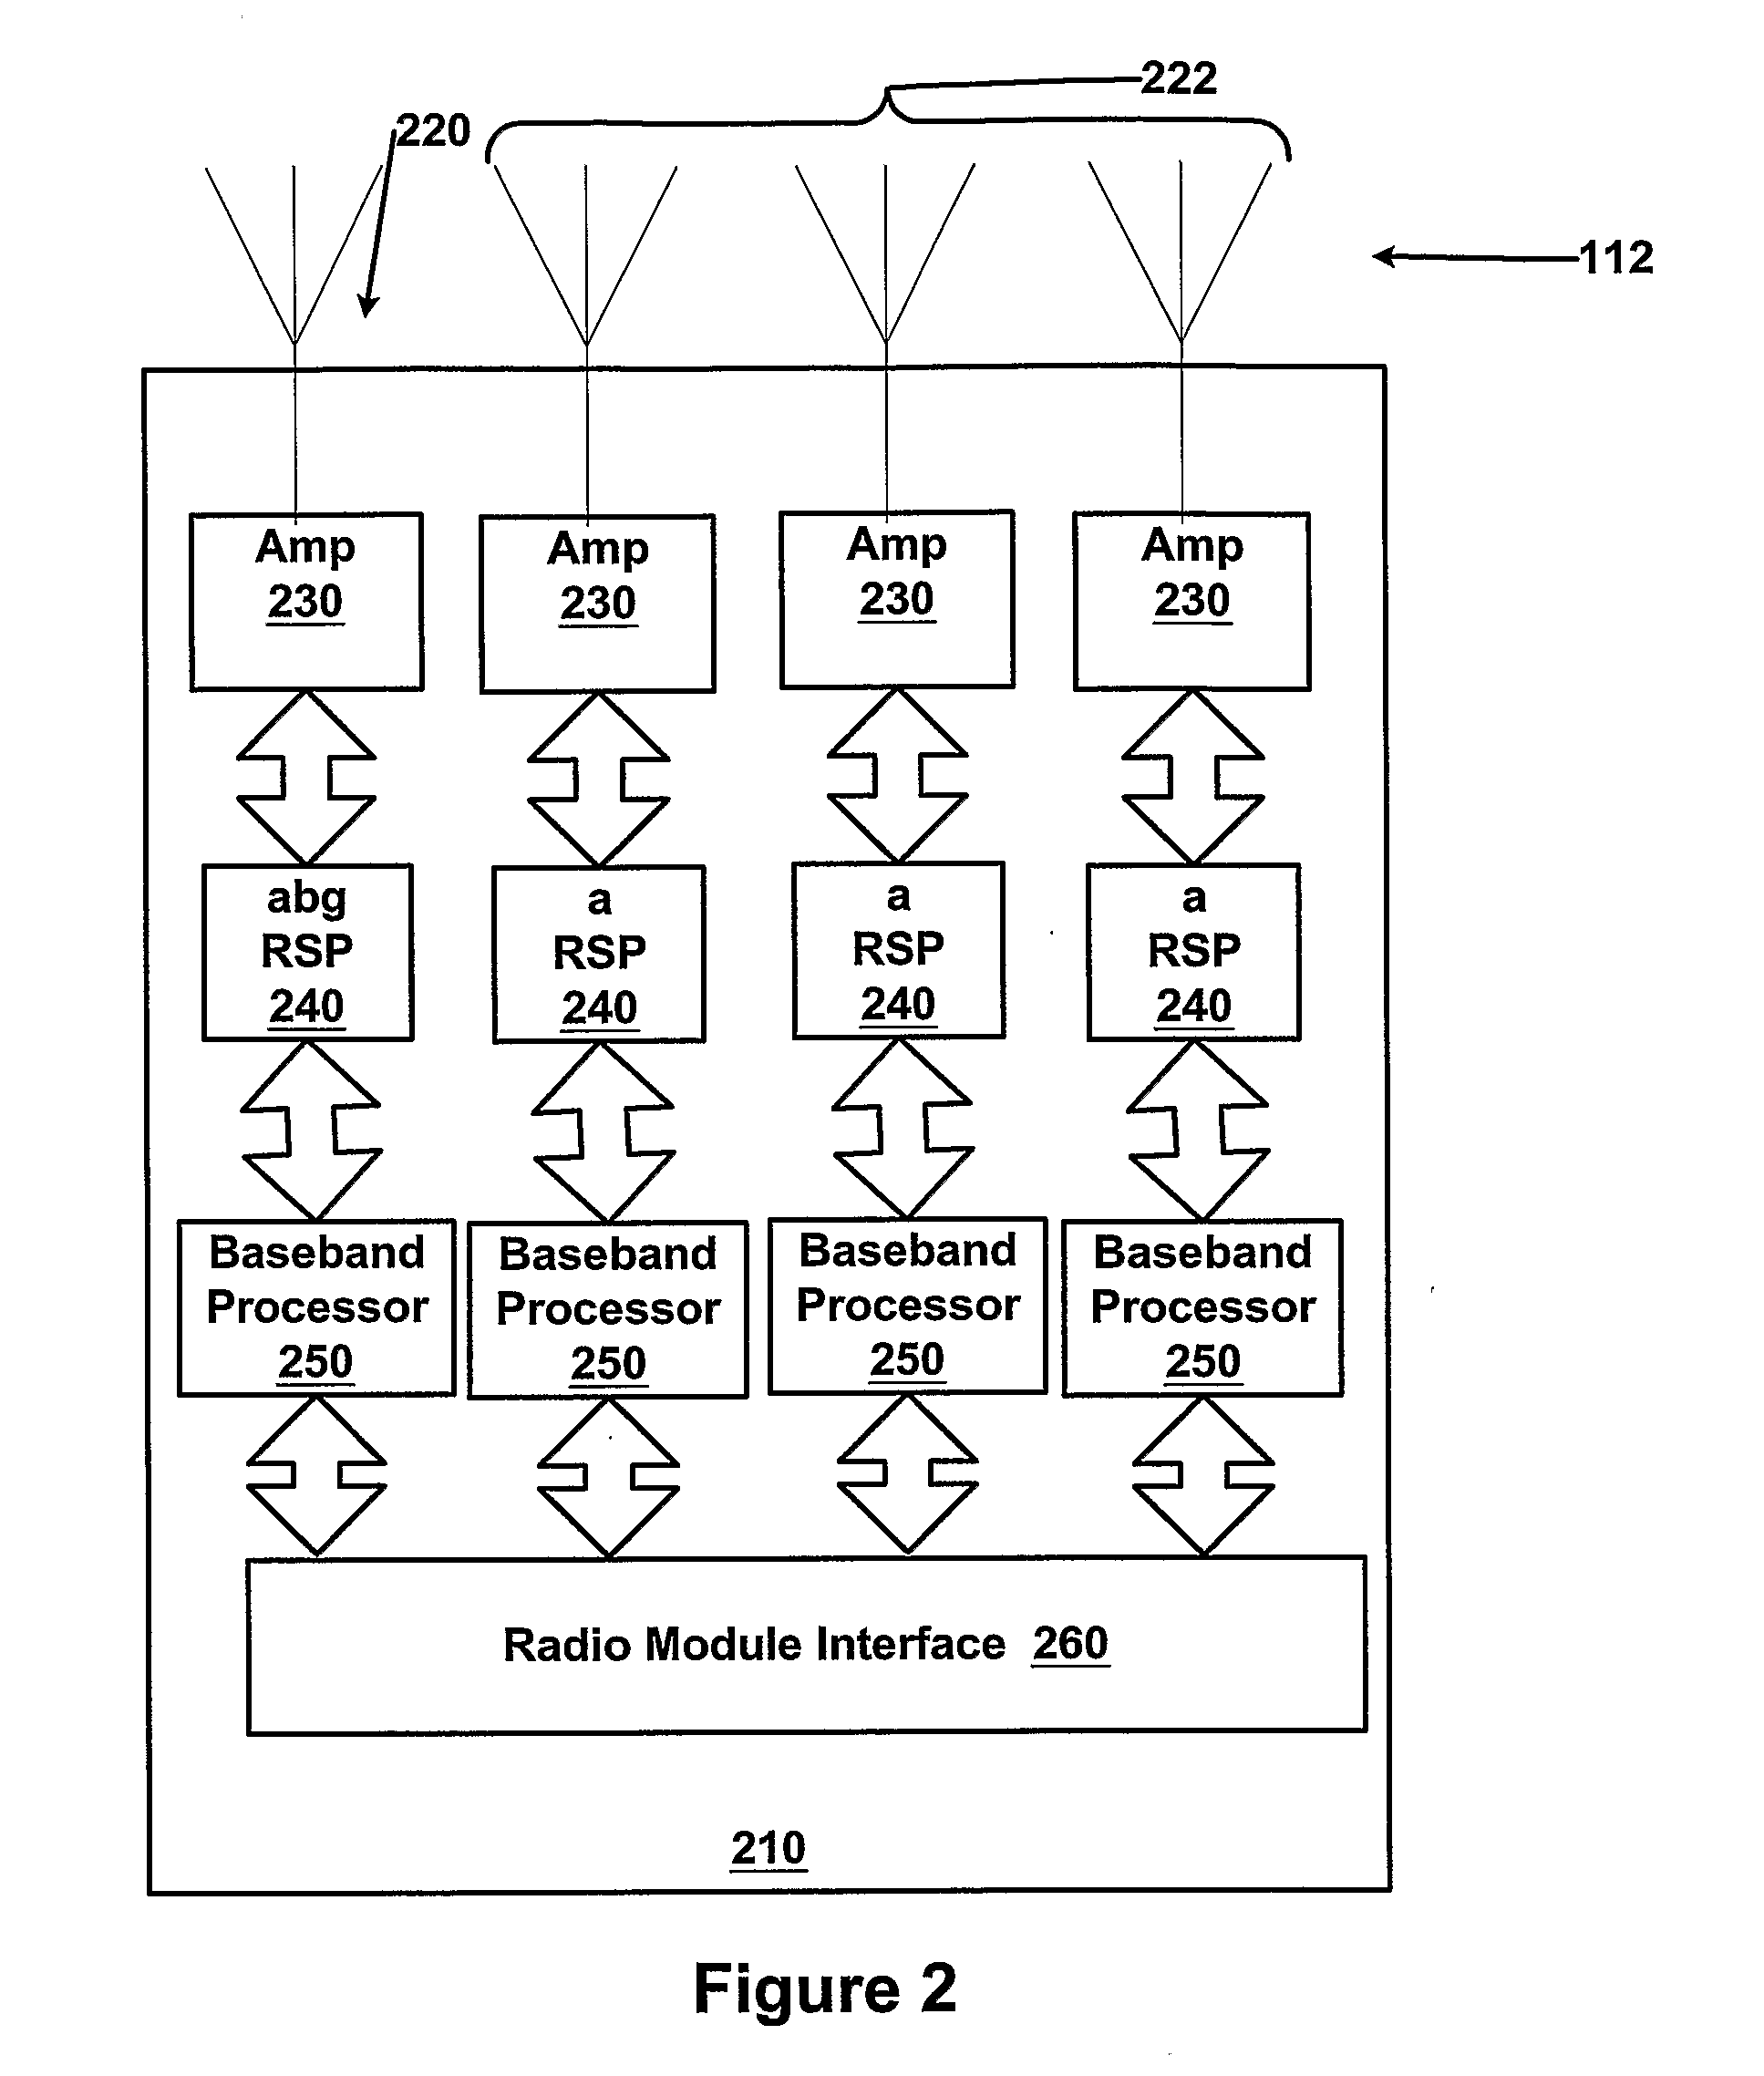 System for allocating channels in a multi-radio wireless LAN array